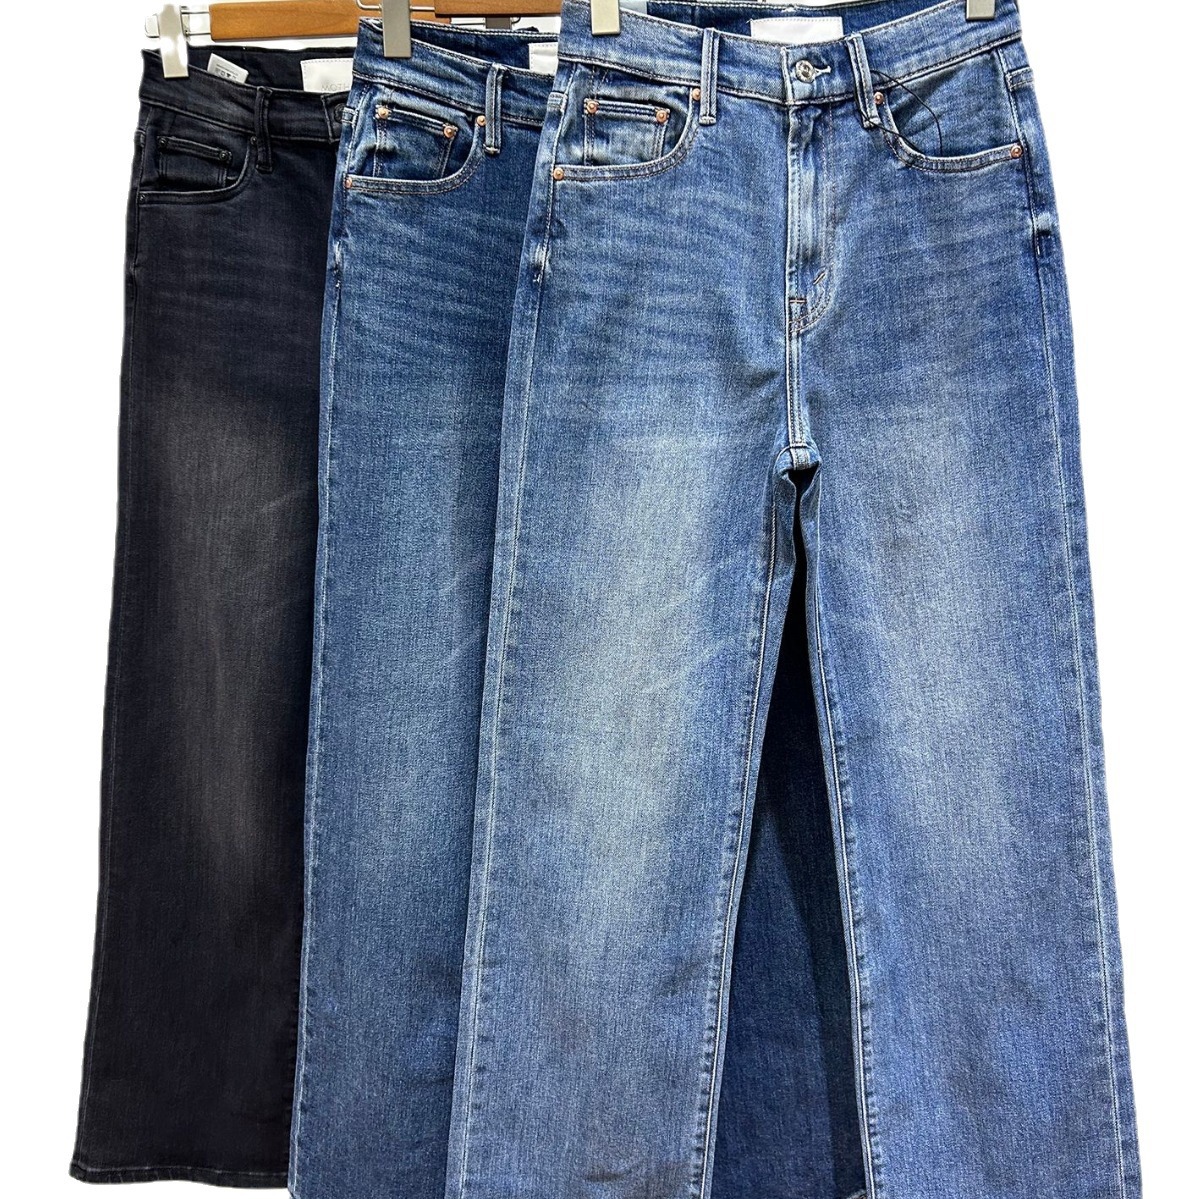 Early Spring 2023 European and American Mo New High Waist Loose Dad Jeans Do Not Pick Leg Type Straight Wide Leg Denim Trousers for Women